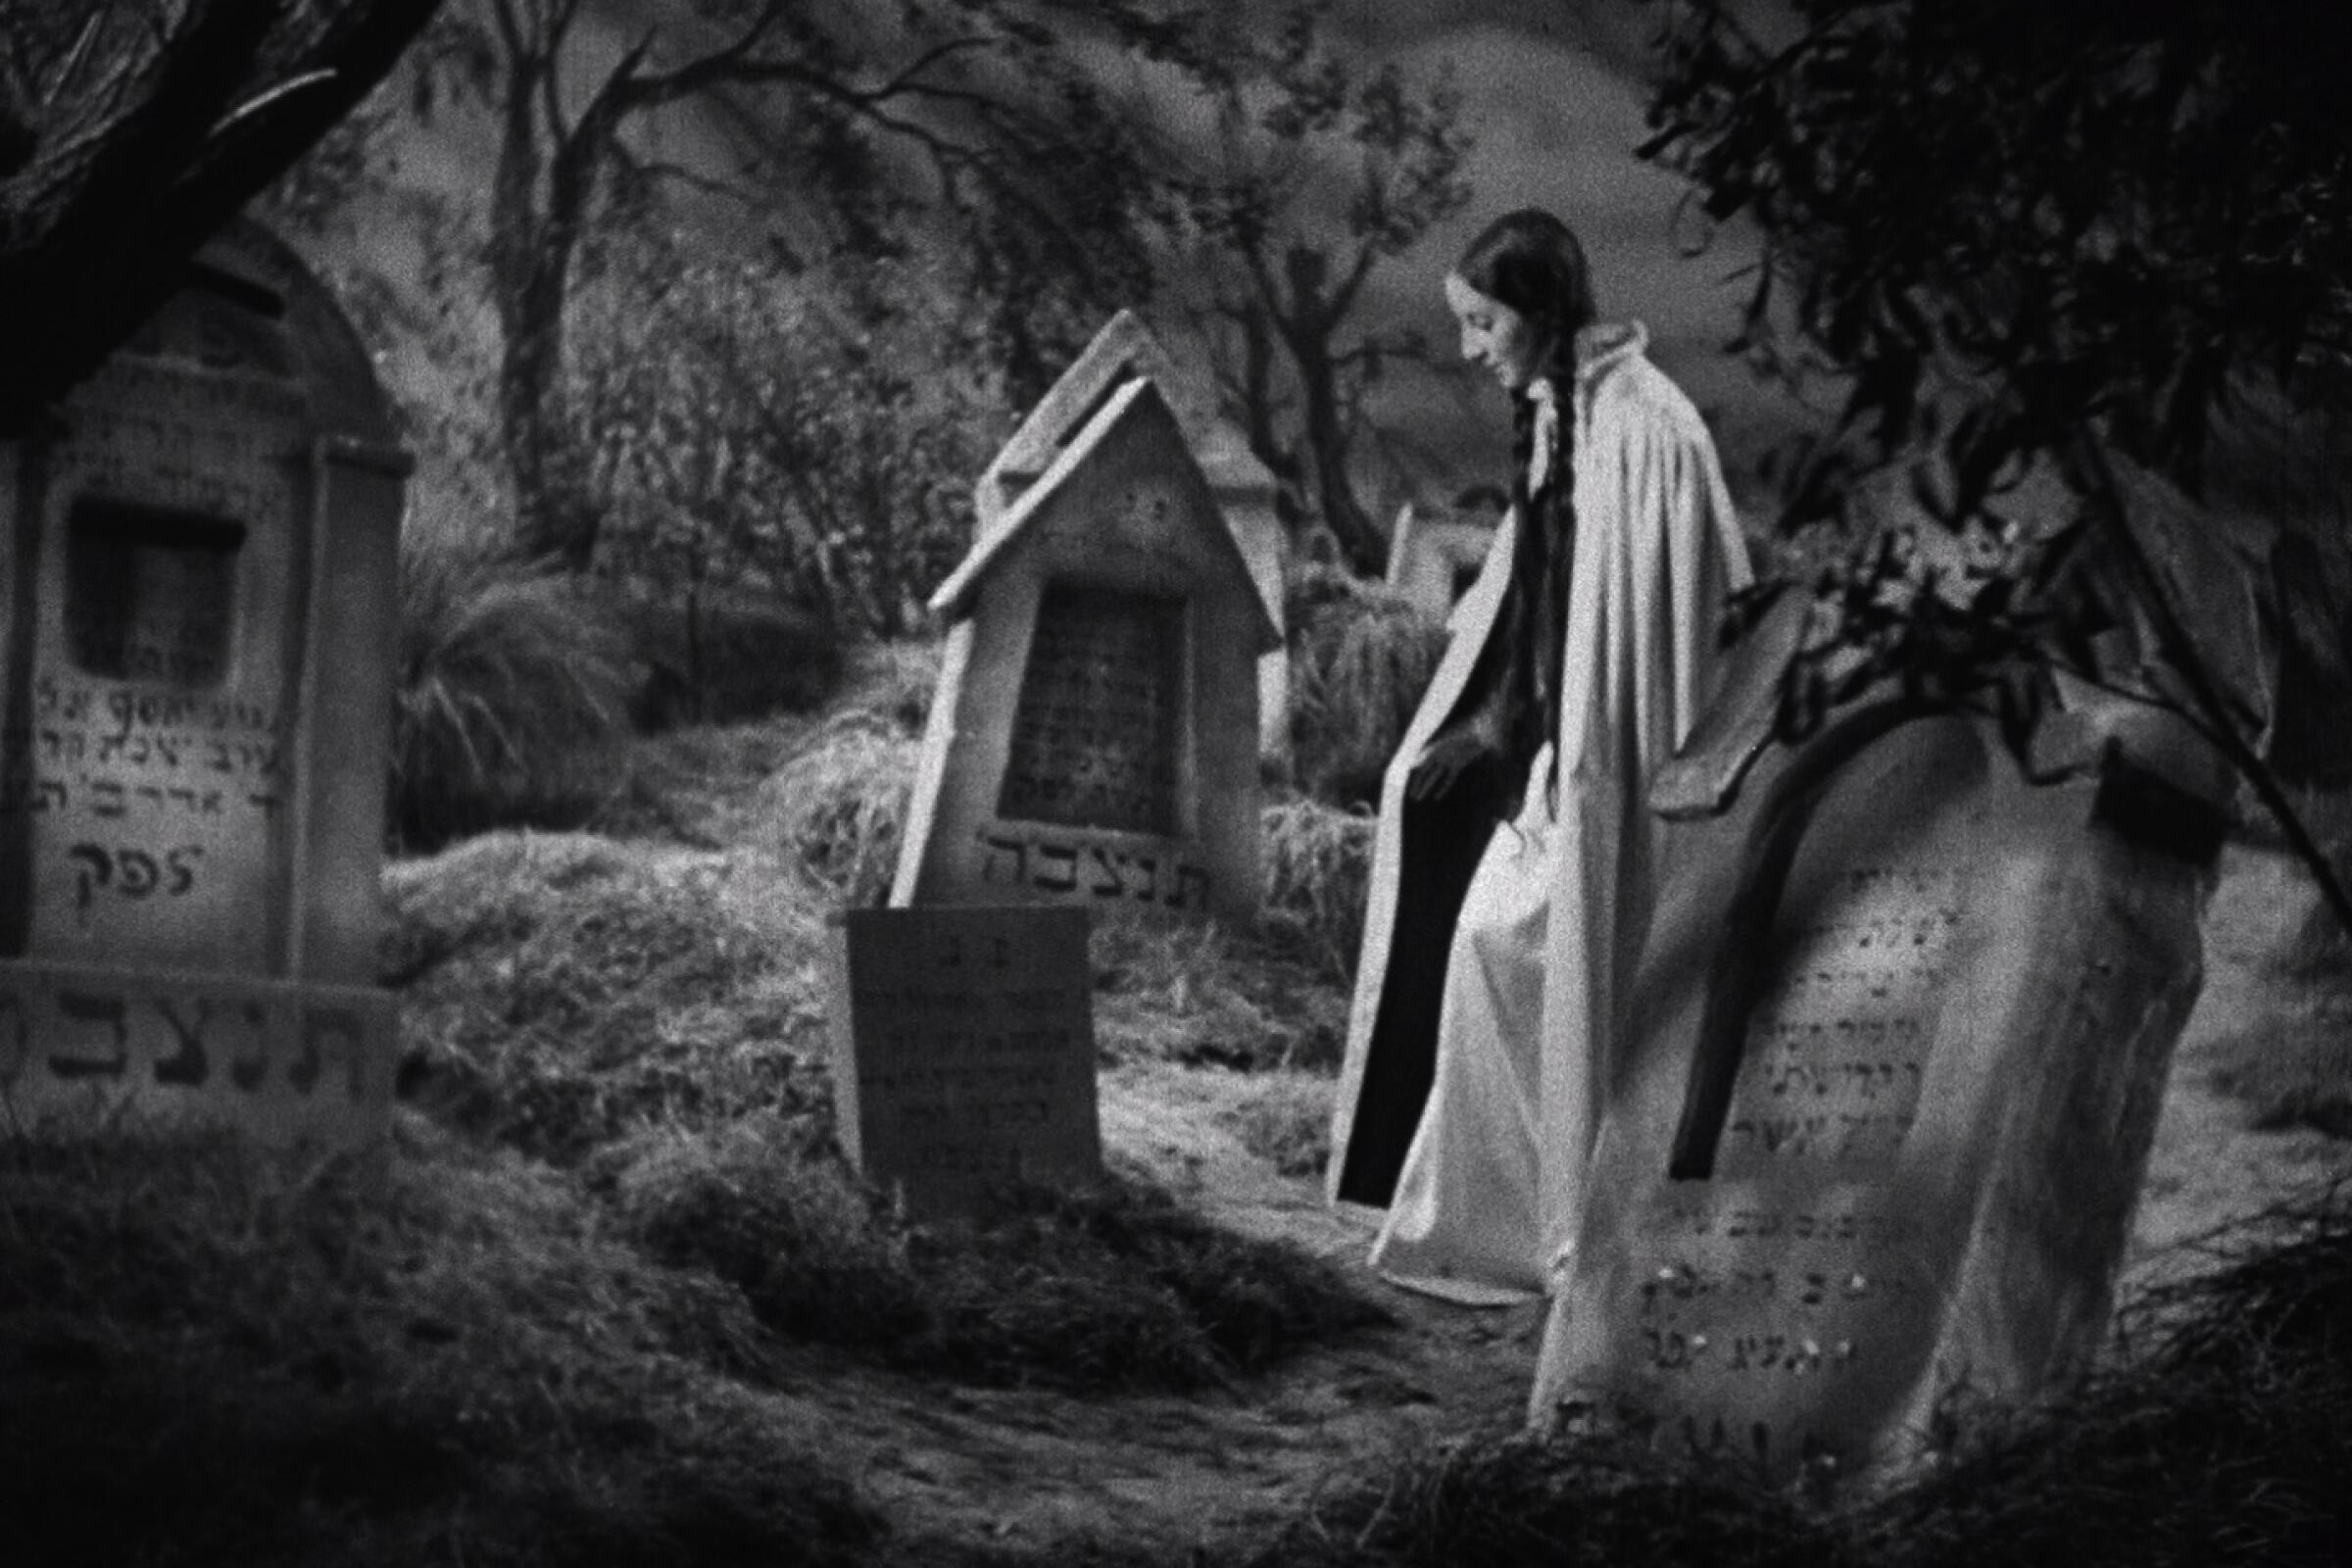 A woman visits a grave in the movie “The Dybbuk"